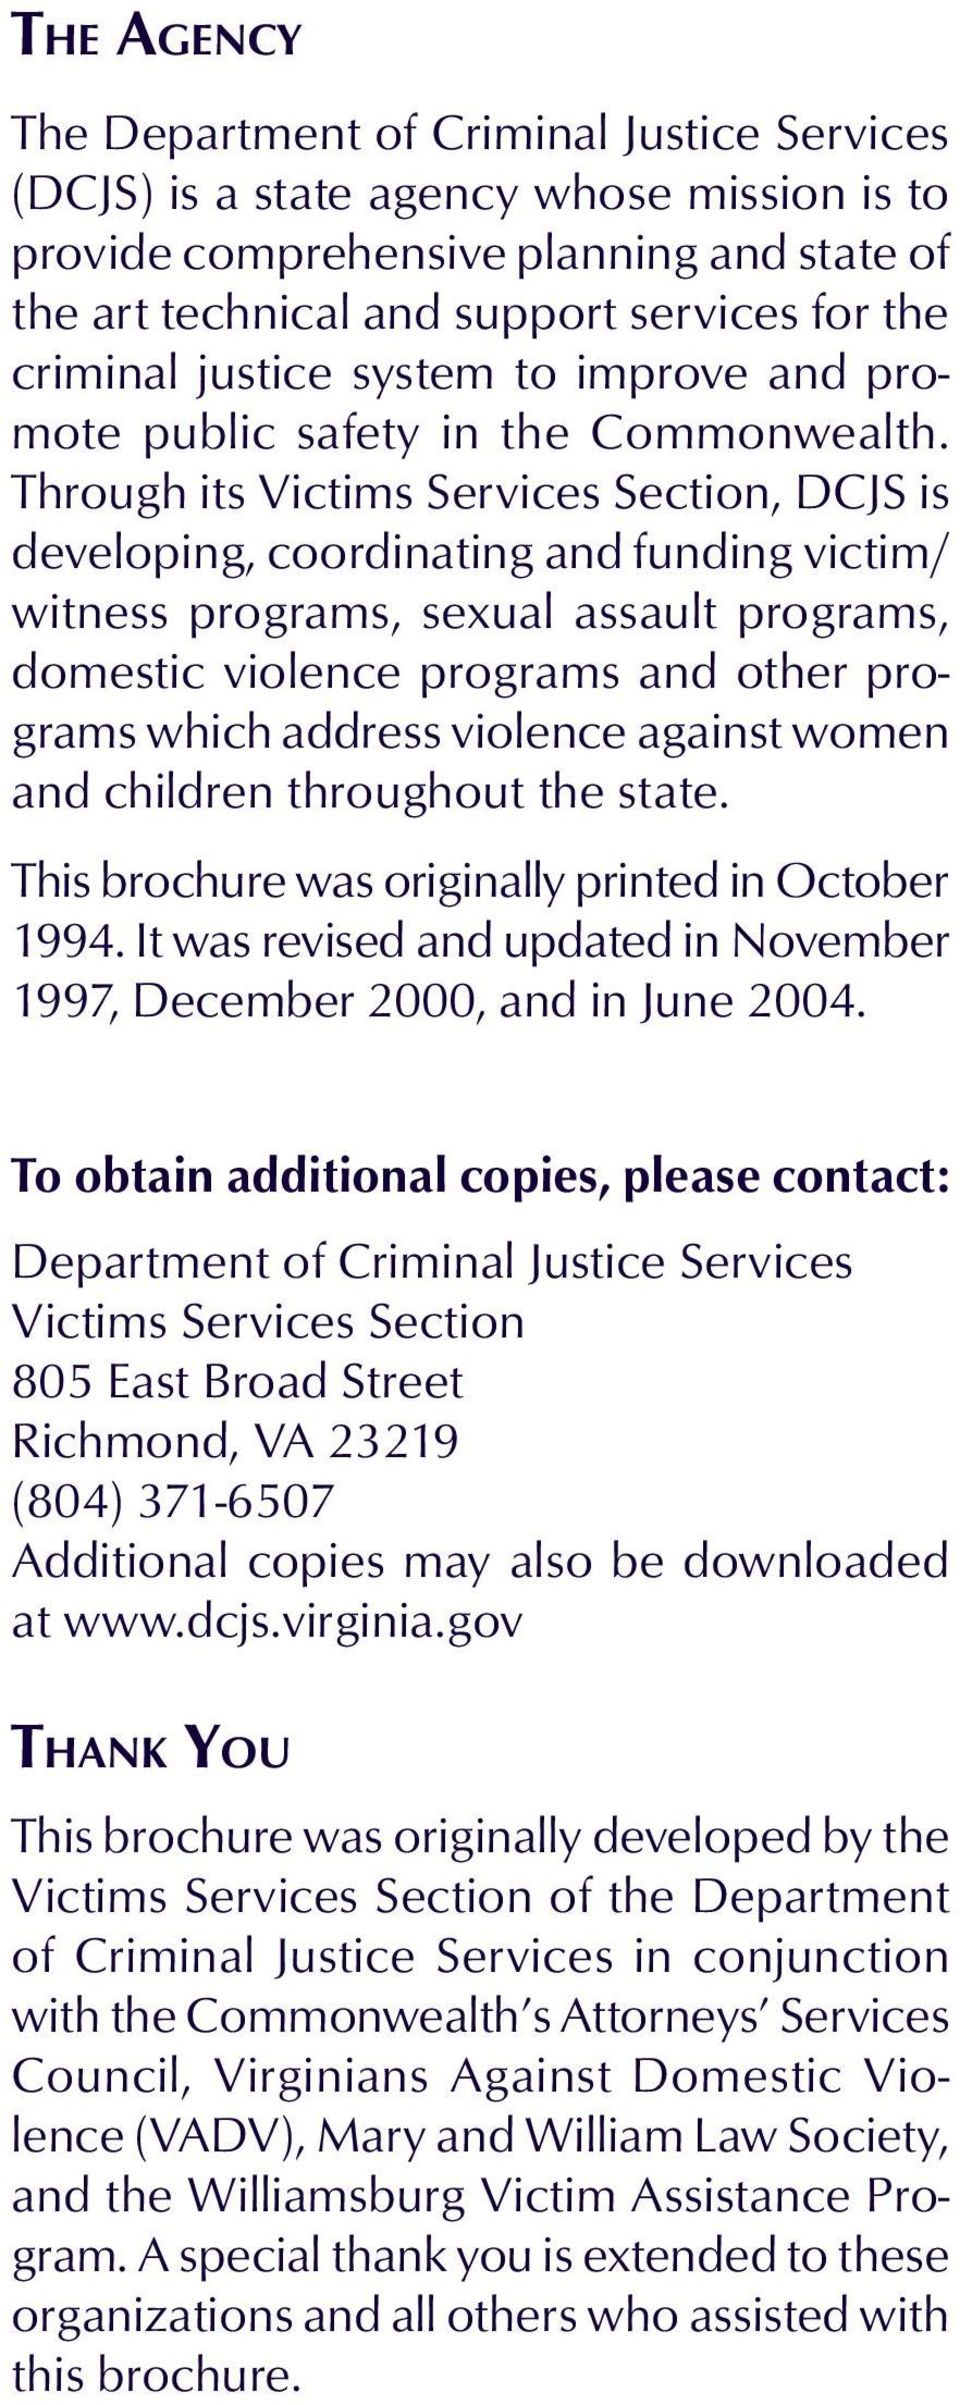 Through its Victims Services Section, DCJS is developing, coordinating and funding victim/ witness programs, sexual assault programs, domestic violence programs and other programs which address